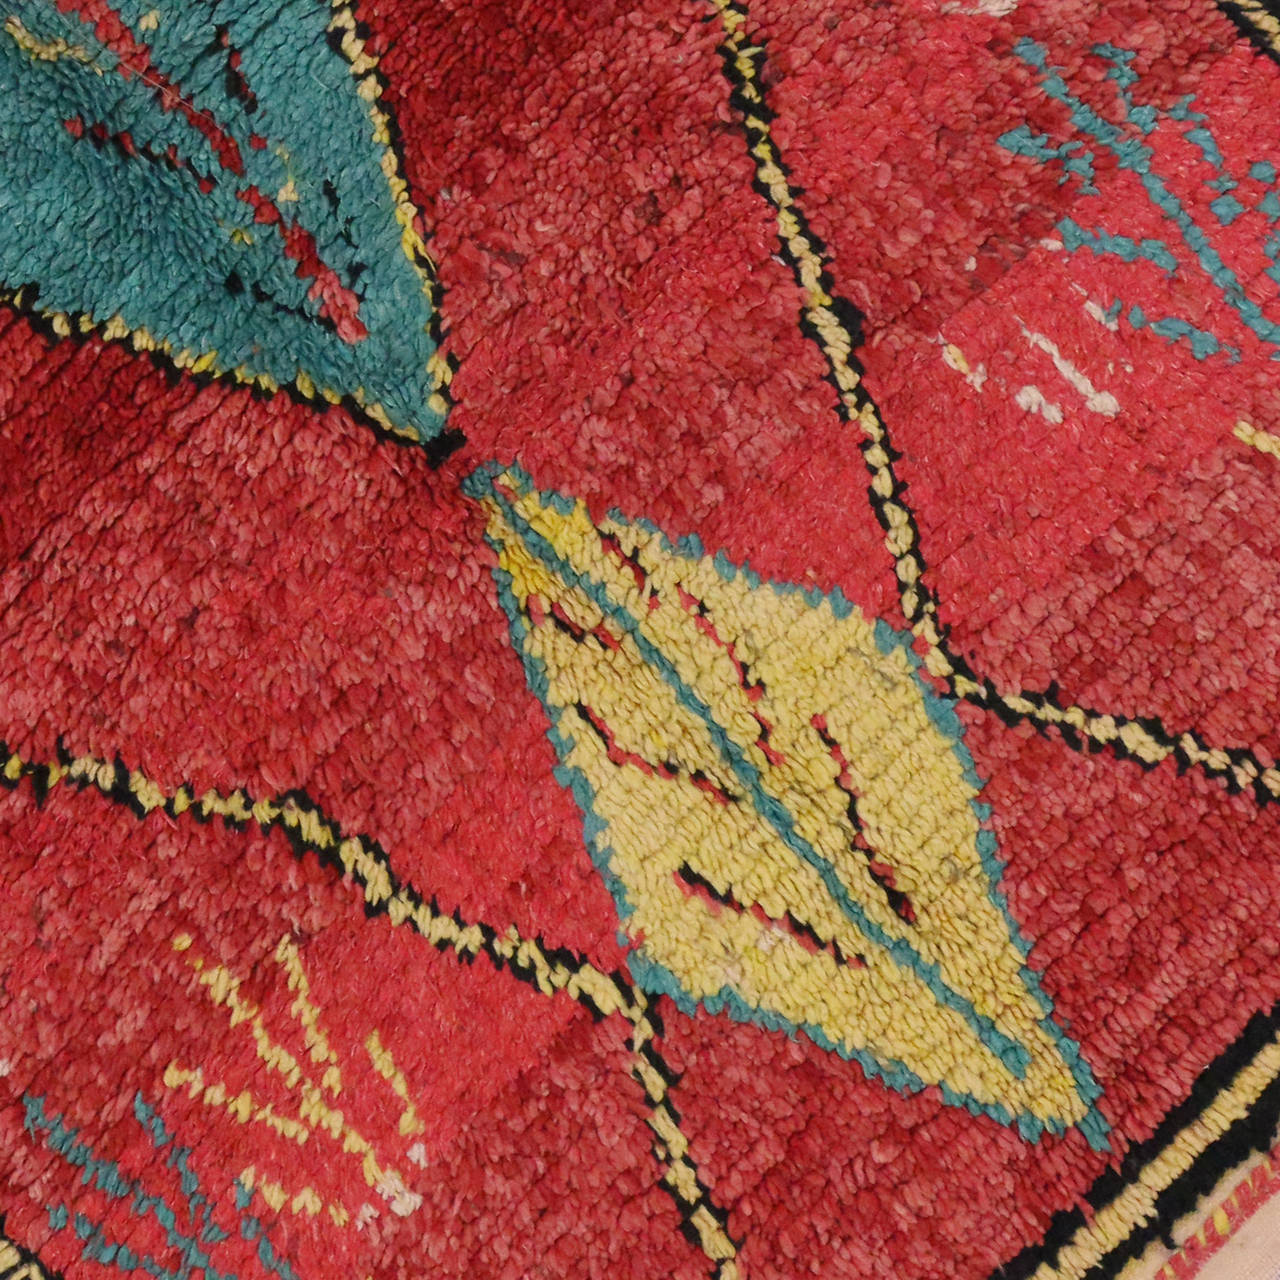 Moroccan rugs are known for their robust sense of geometric structure and colorful compositions making them a favorite among interior designers and savvy homeowners. The free-form designs in this vintage Moroccan rug synthesize beautifully with